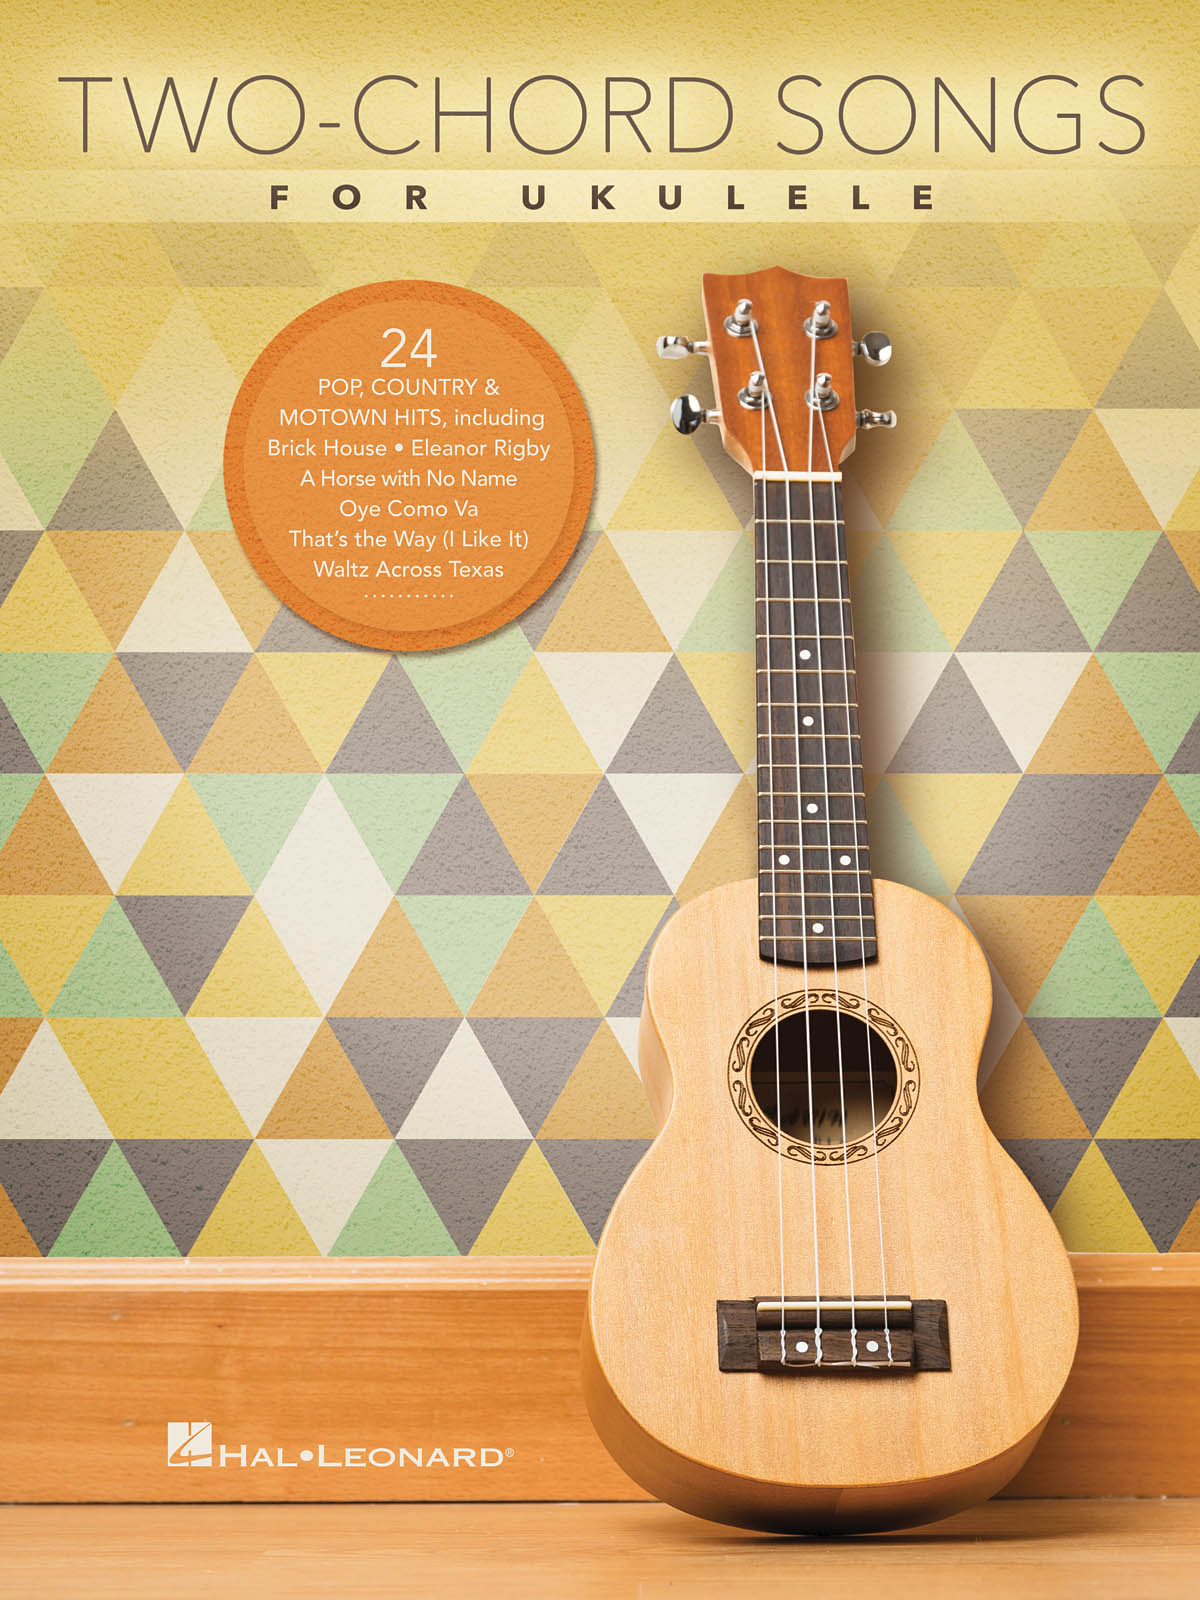 Two-chord songs for ukelele - 24 pop, country and motown hits - noty pro ukulele